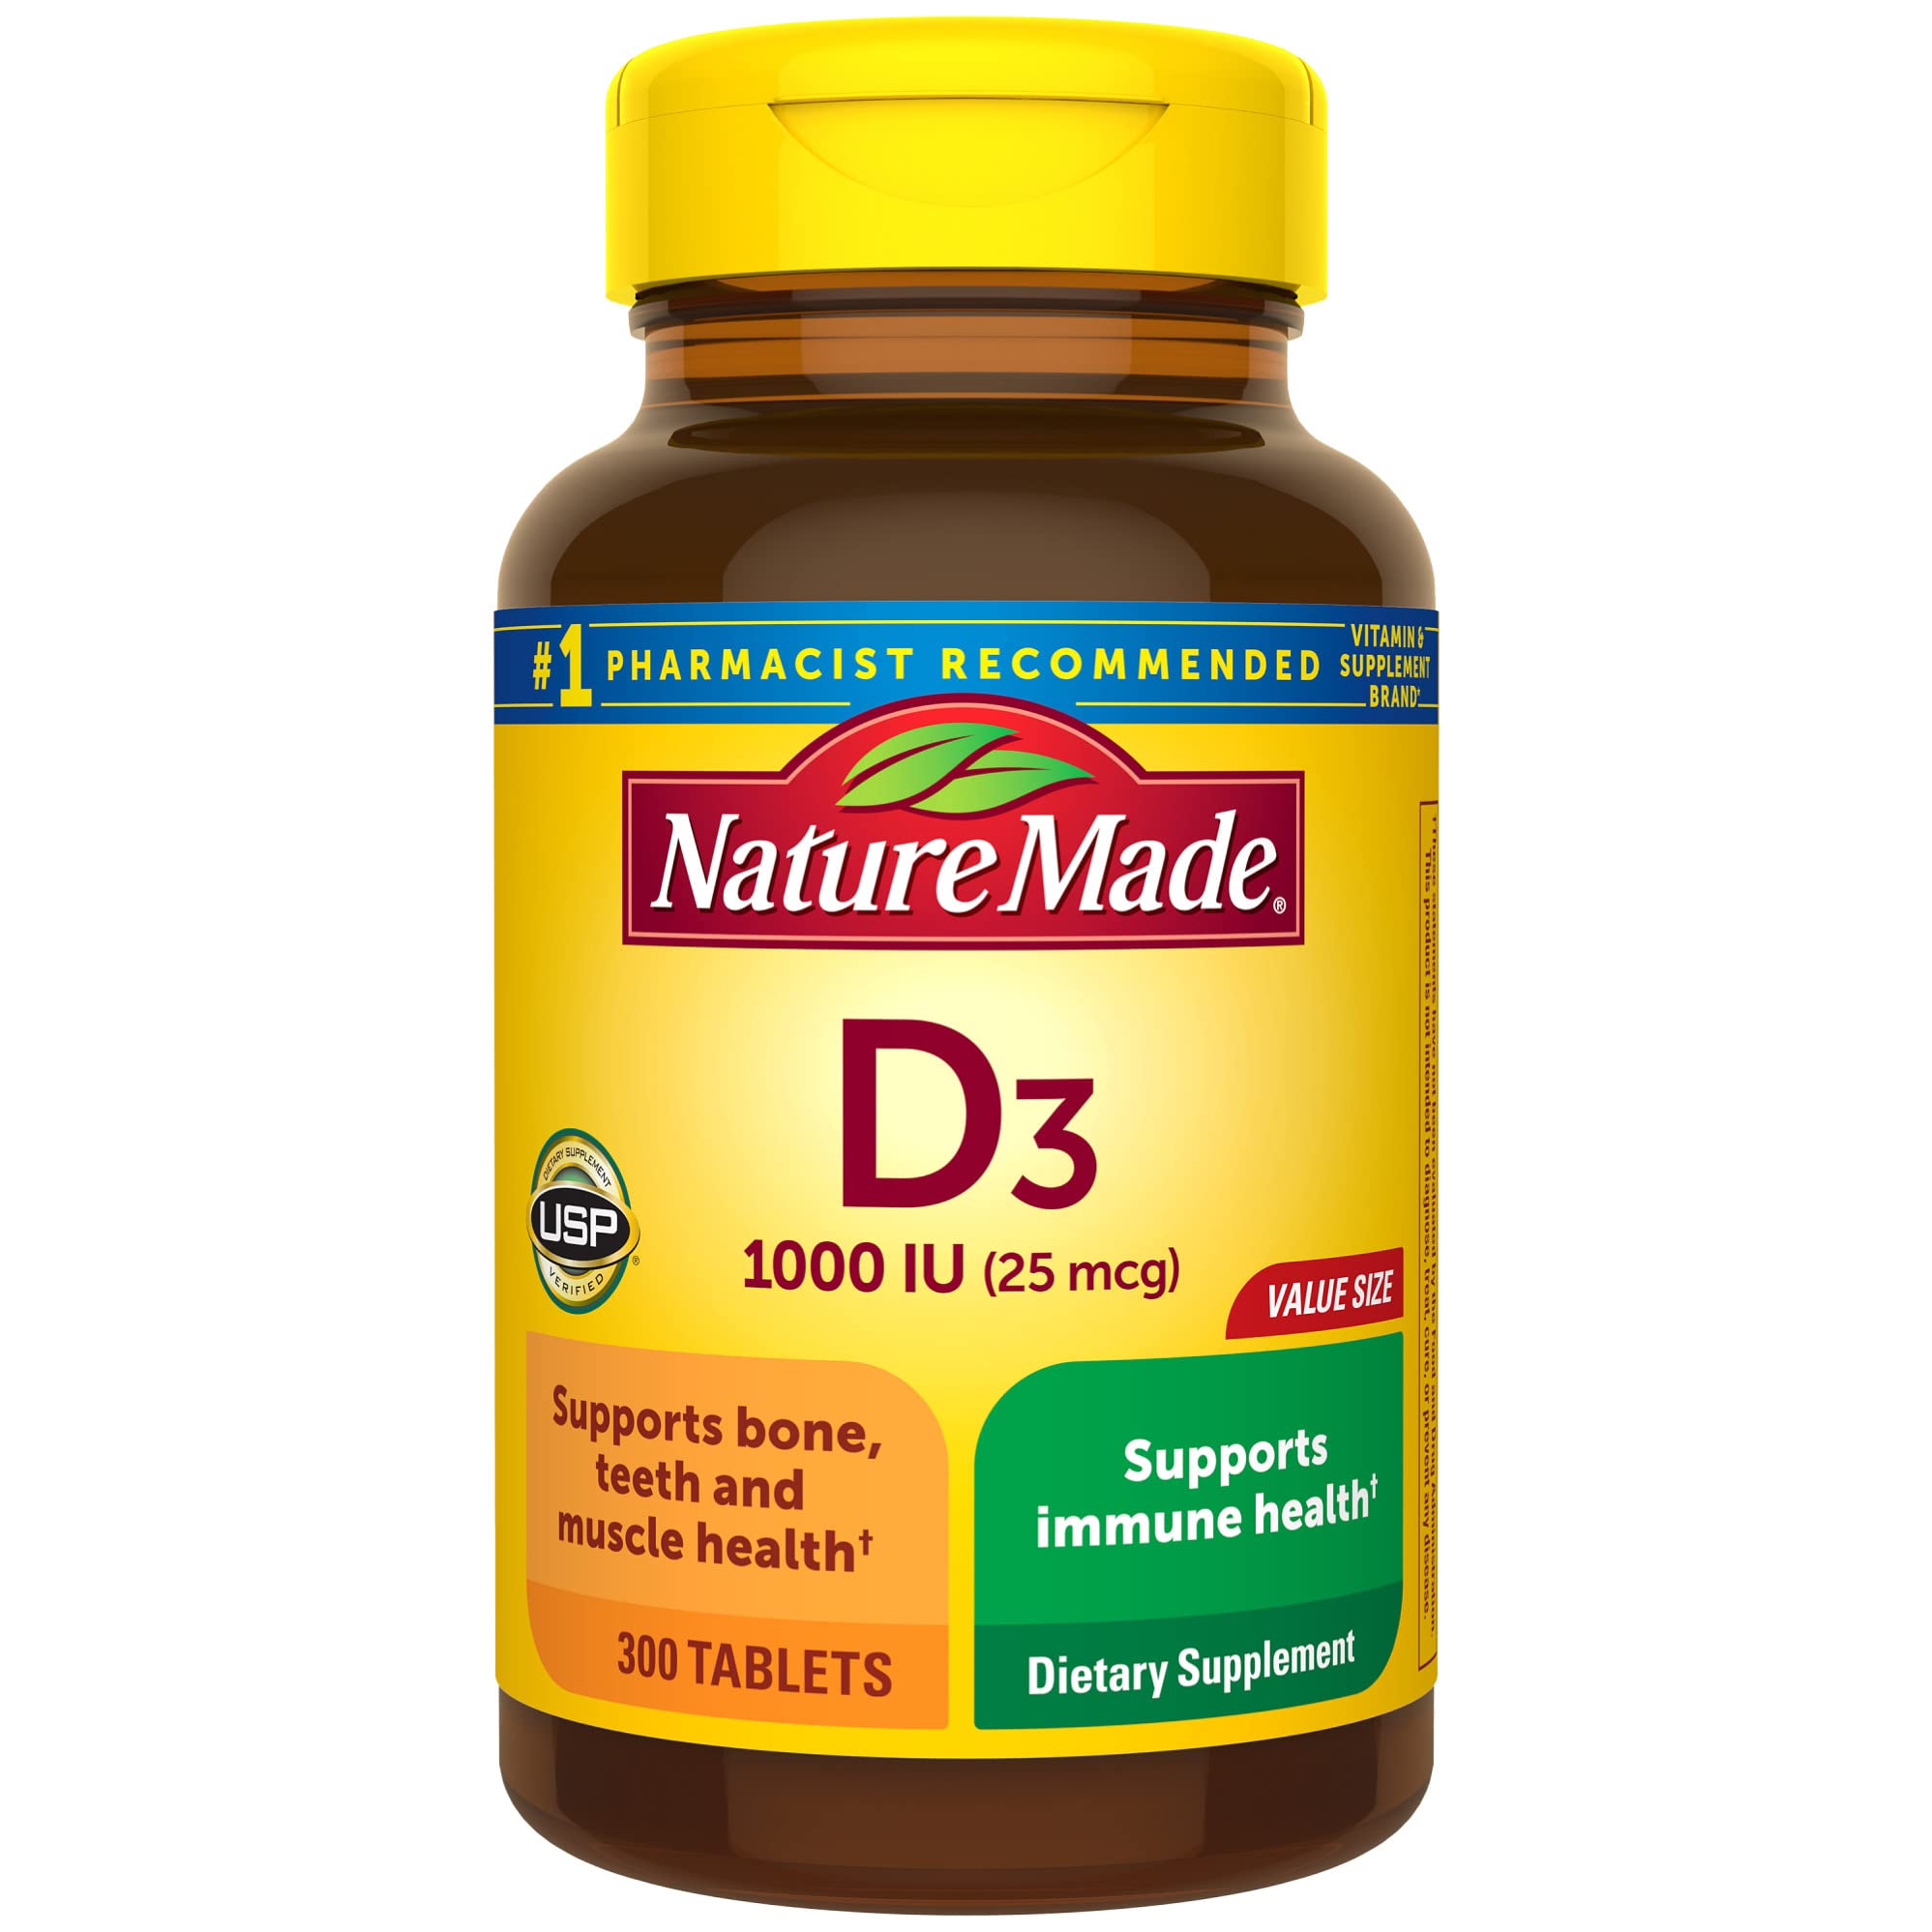 Nature Made Vitamin D3 1000 IU (25 mcg), Dietary Supplement for Bone, Teeth, Muscle and Immune Health Support, 300 Tablets, 300 Day Supply